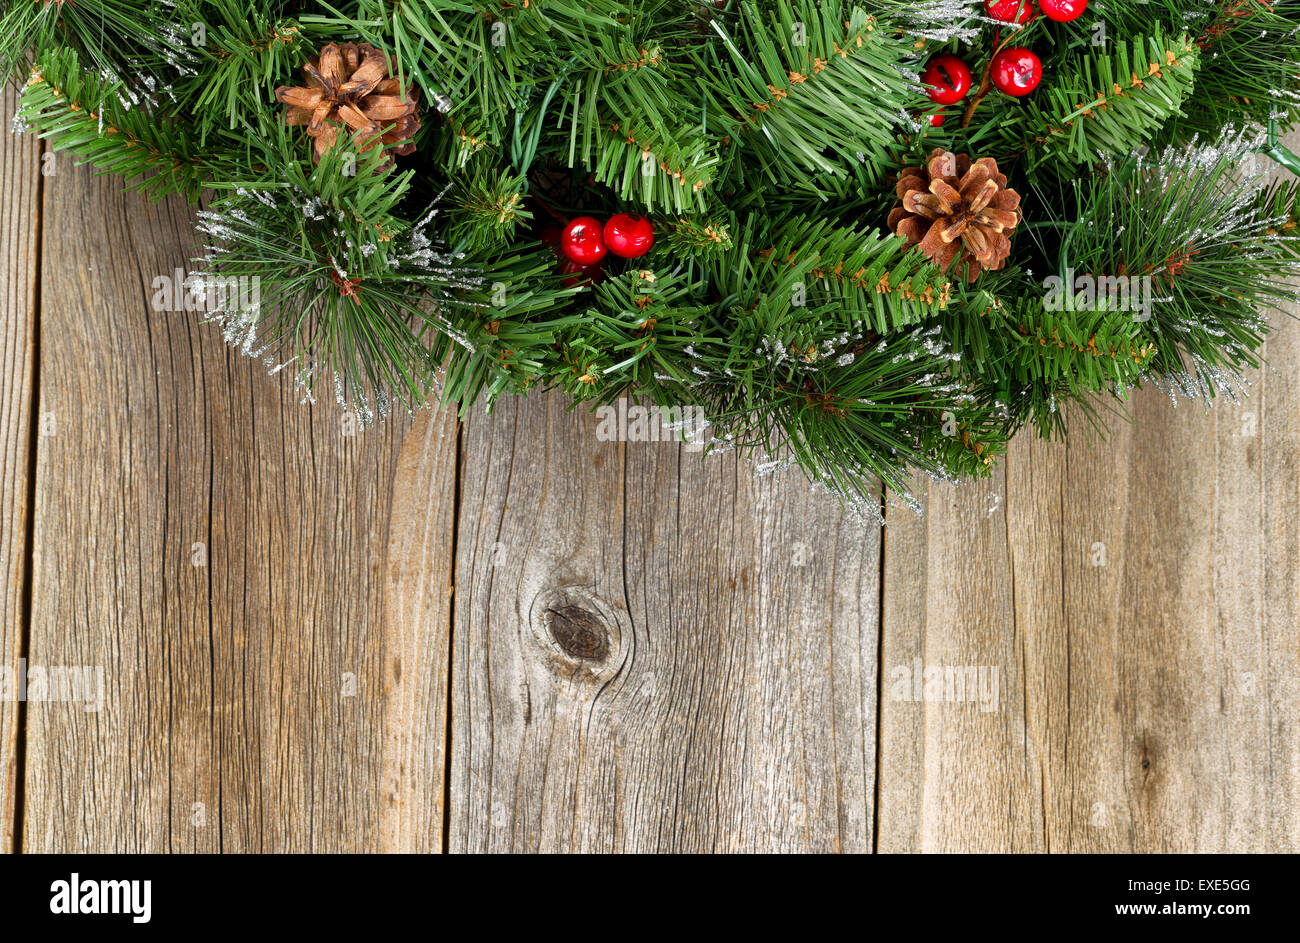 Christmas border with decorative wreath on rustic wooden boards. Stock Photo